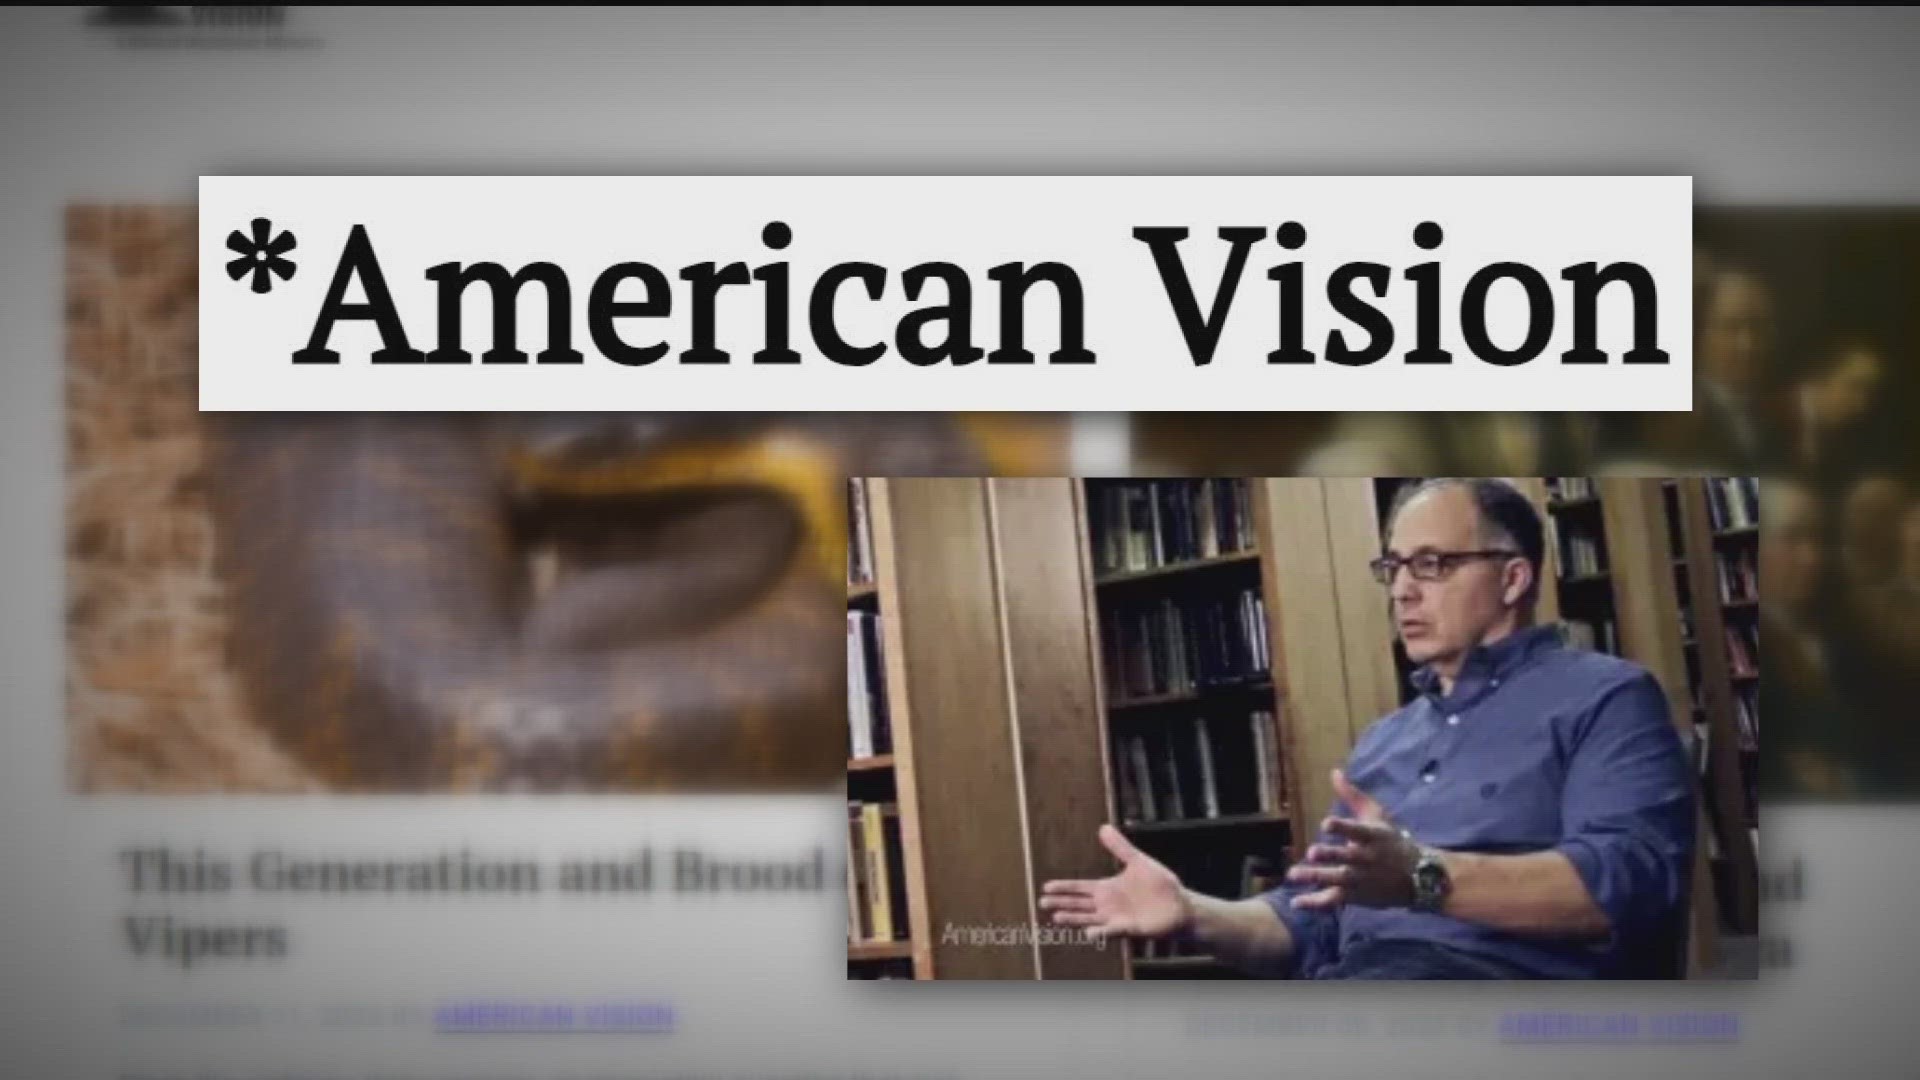 There are concerns that the administrators are connected with "American Vision."